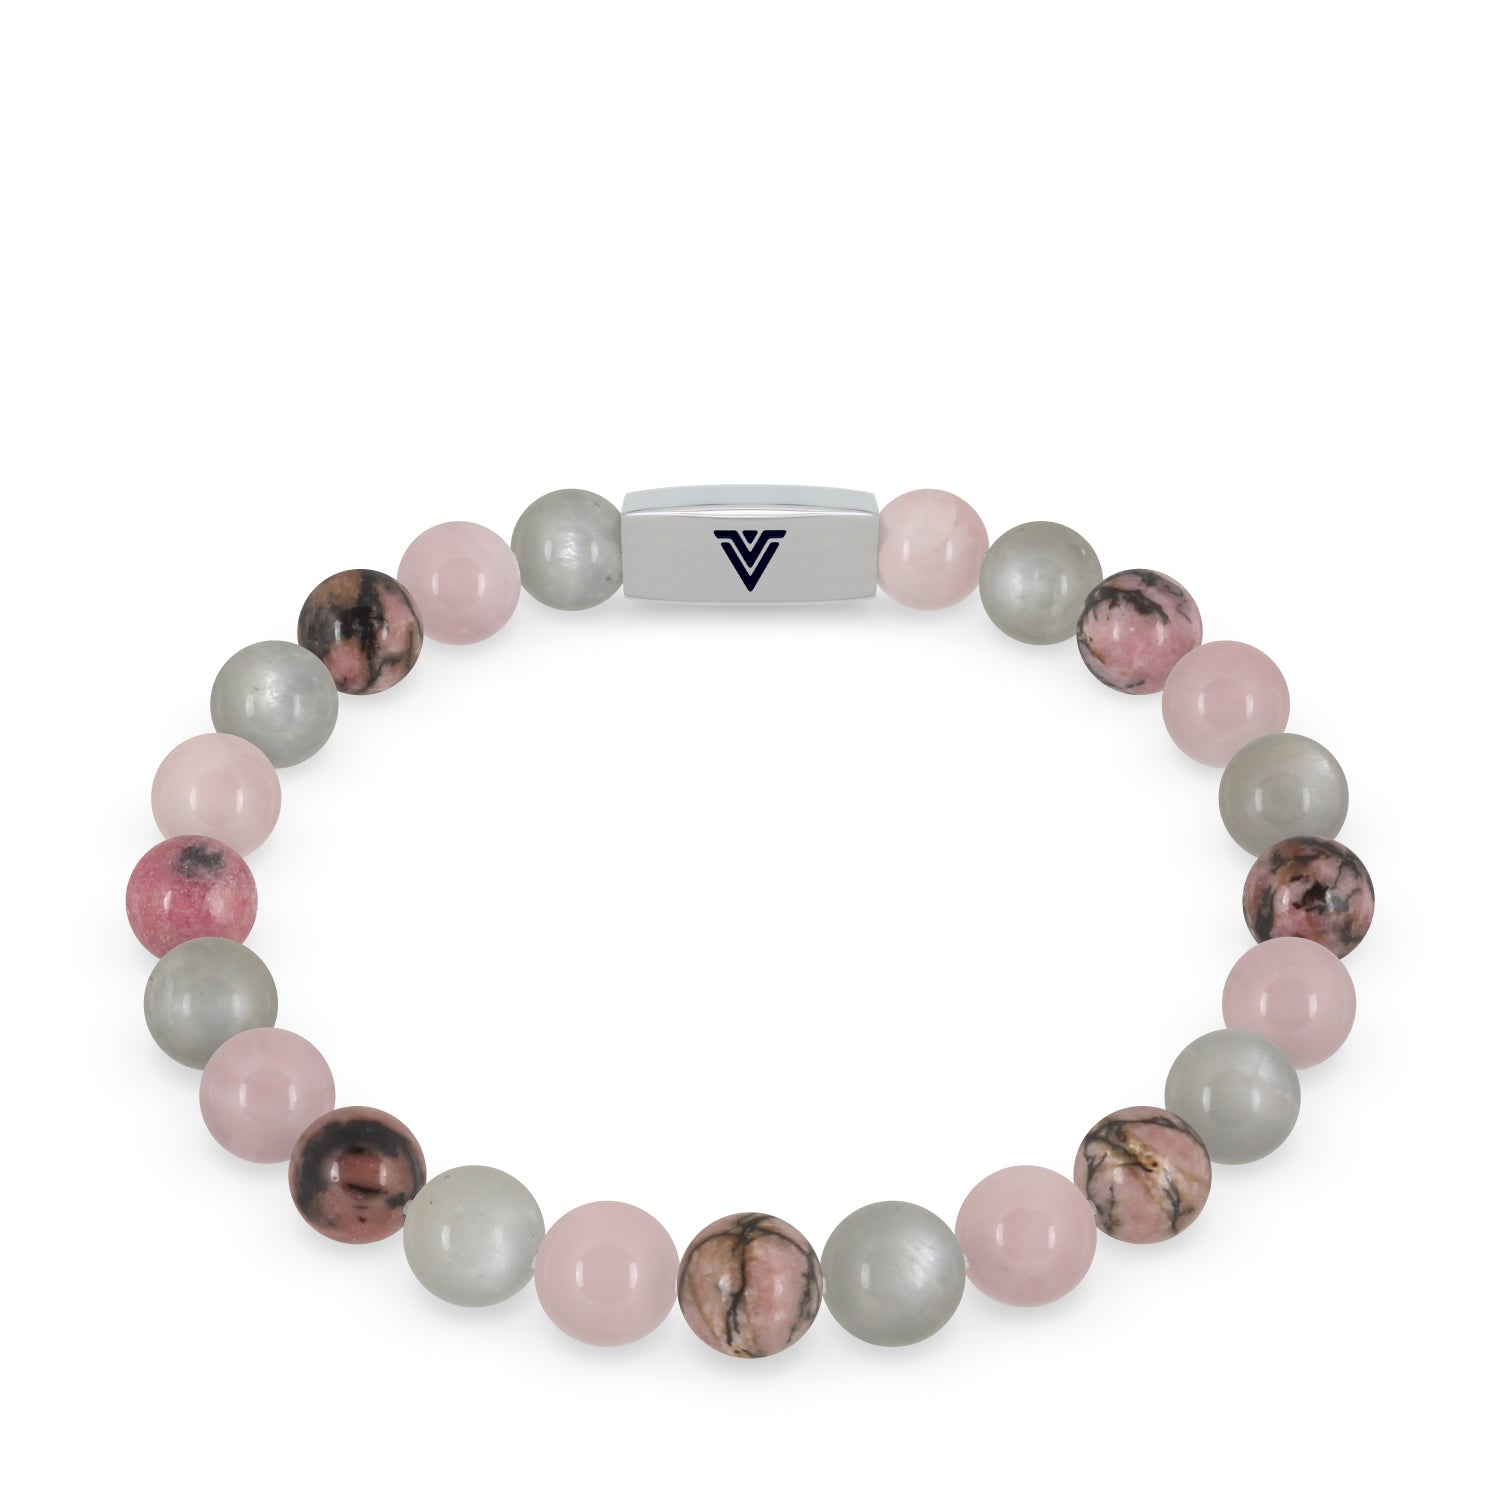 Front view of an 8mm Cancer Zodiac beaded stretch bracelet featuring Moonstone, Rose Quartz, & Rhodonite crystal and silver stainless steel logo bead made by Voltlin